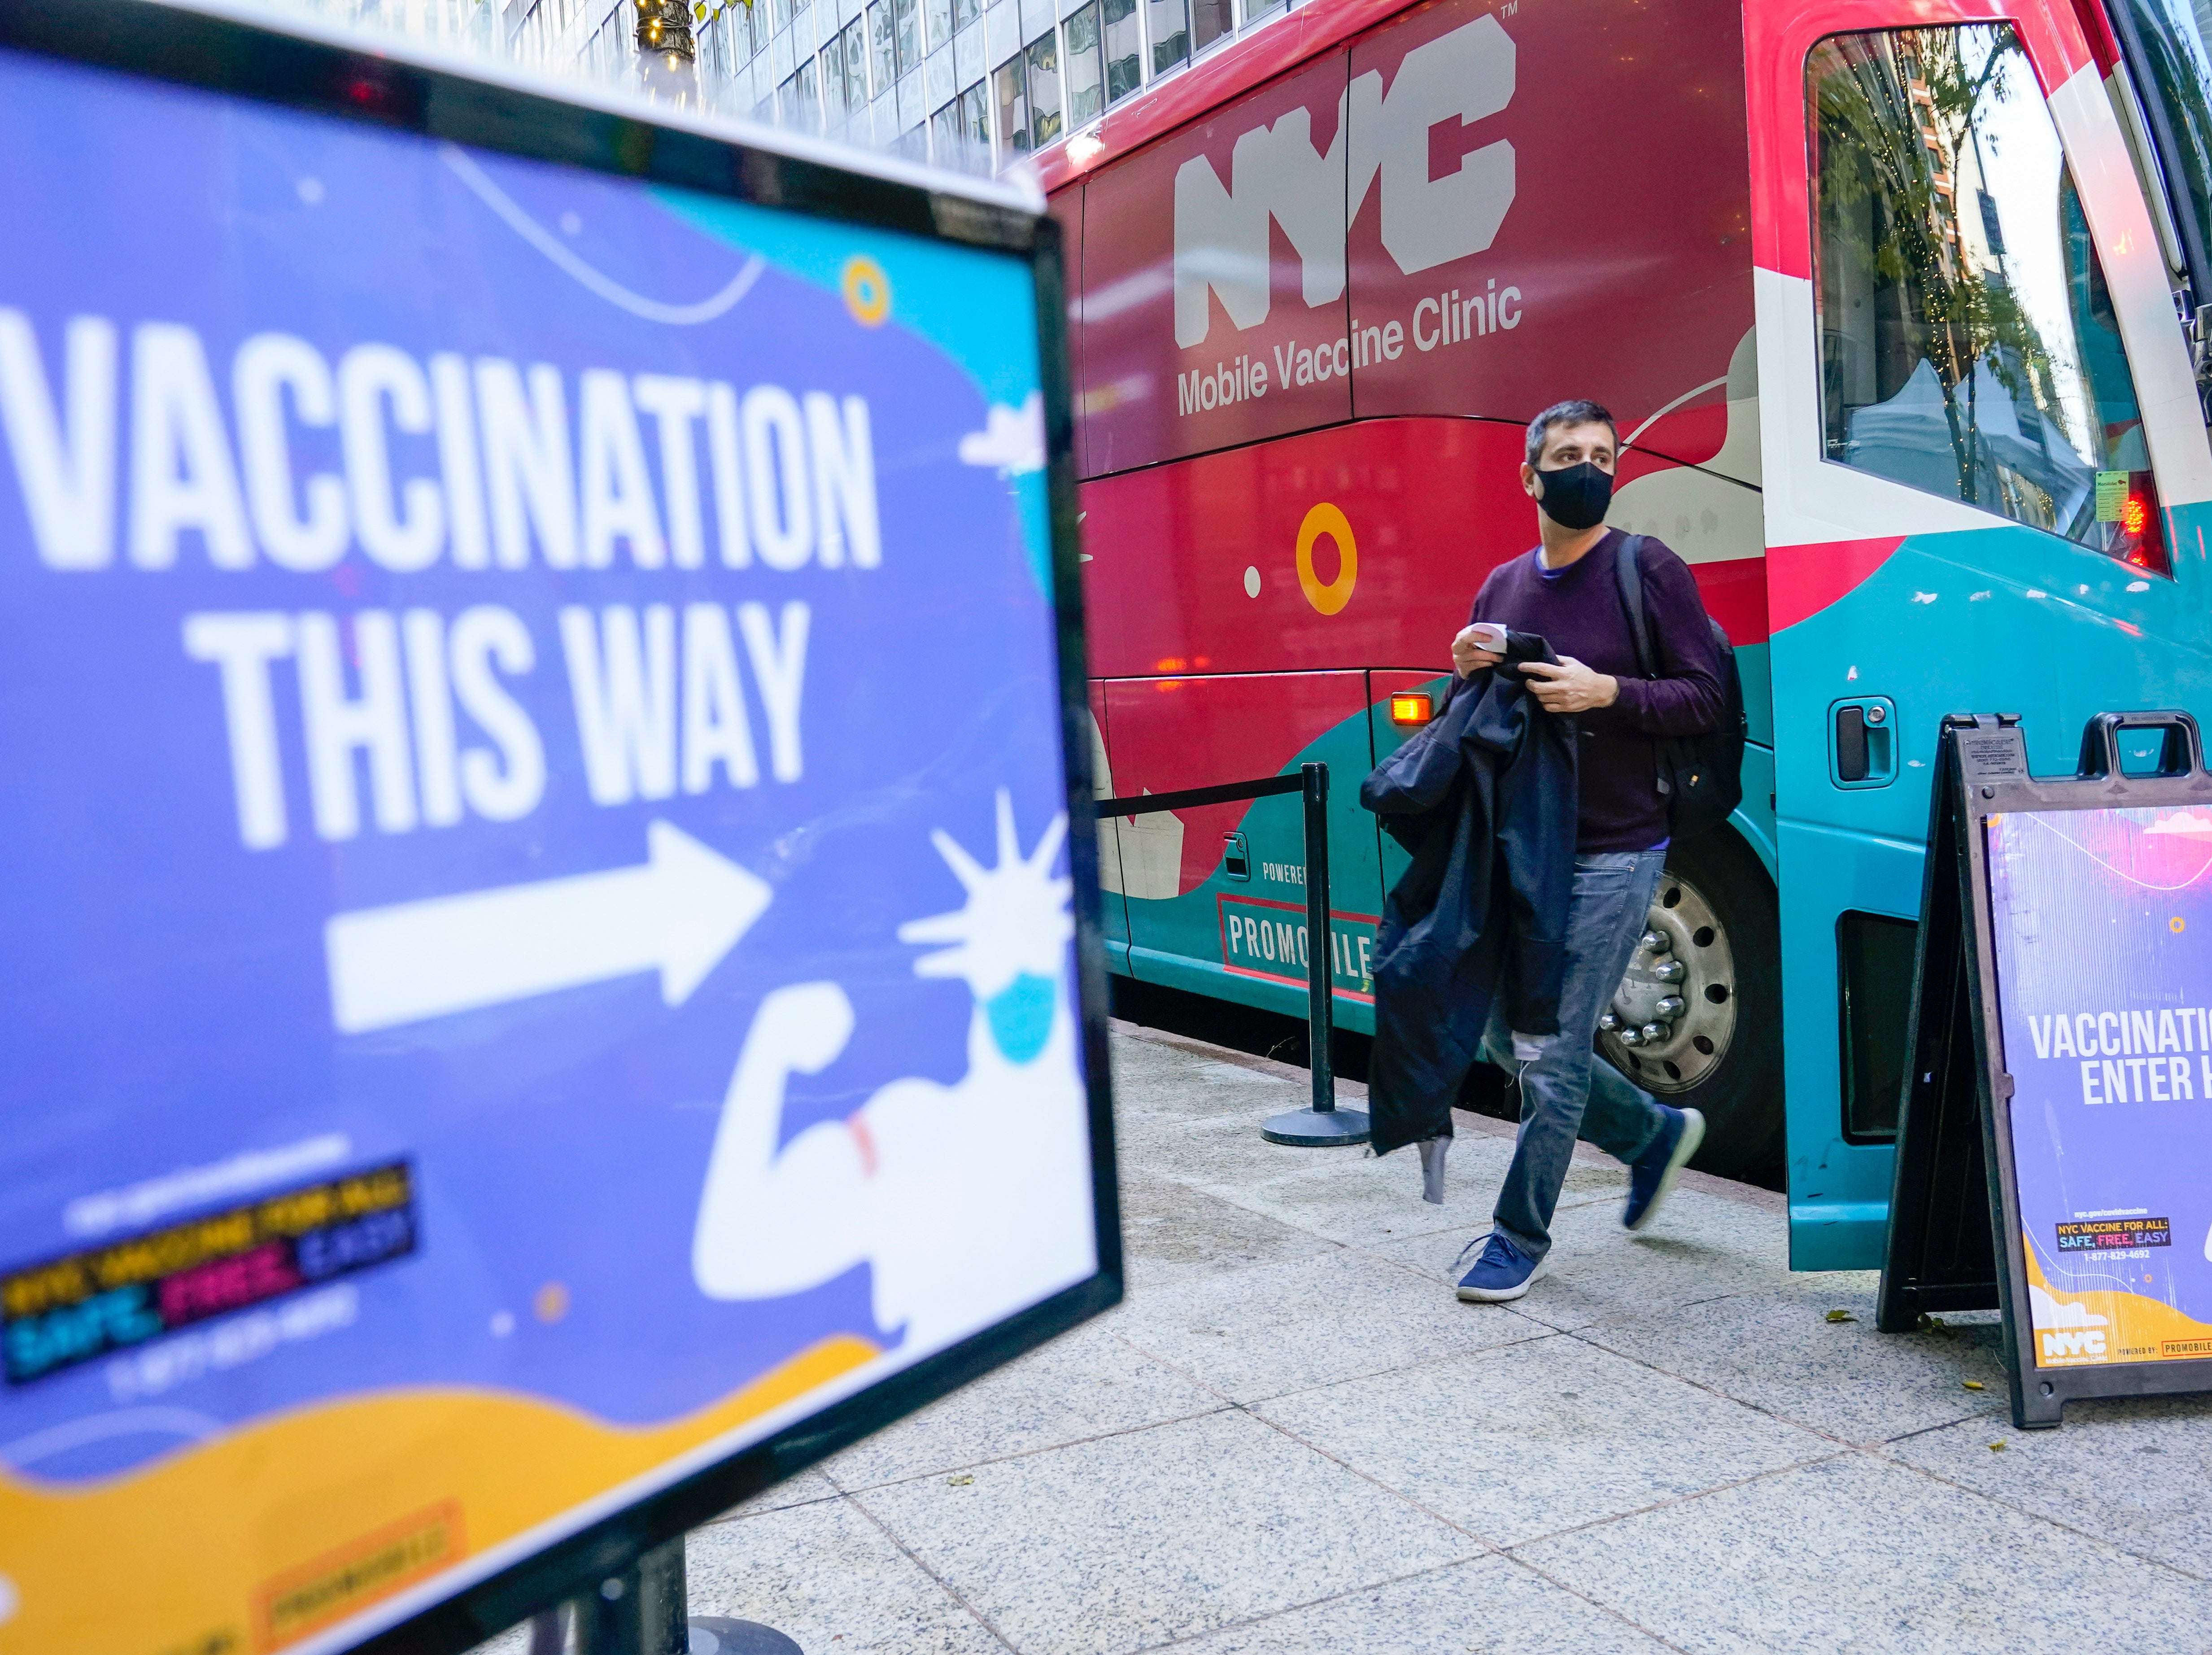 A mobile vaccination centre in New York City